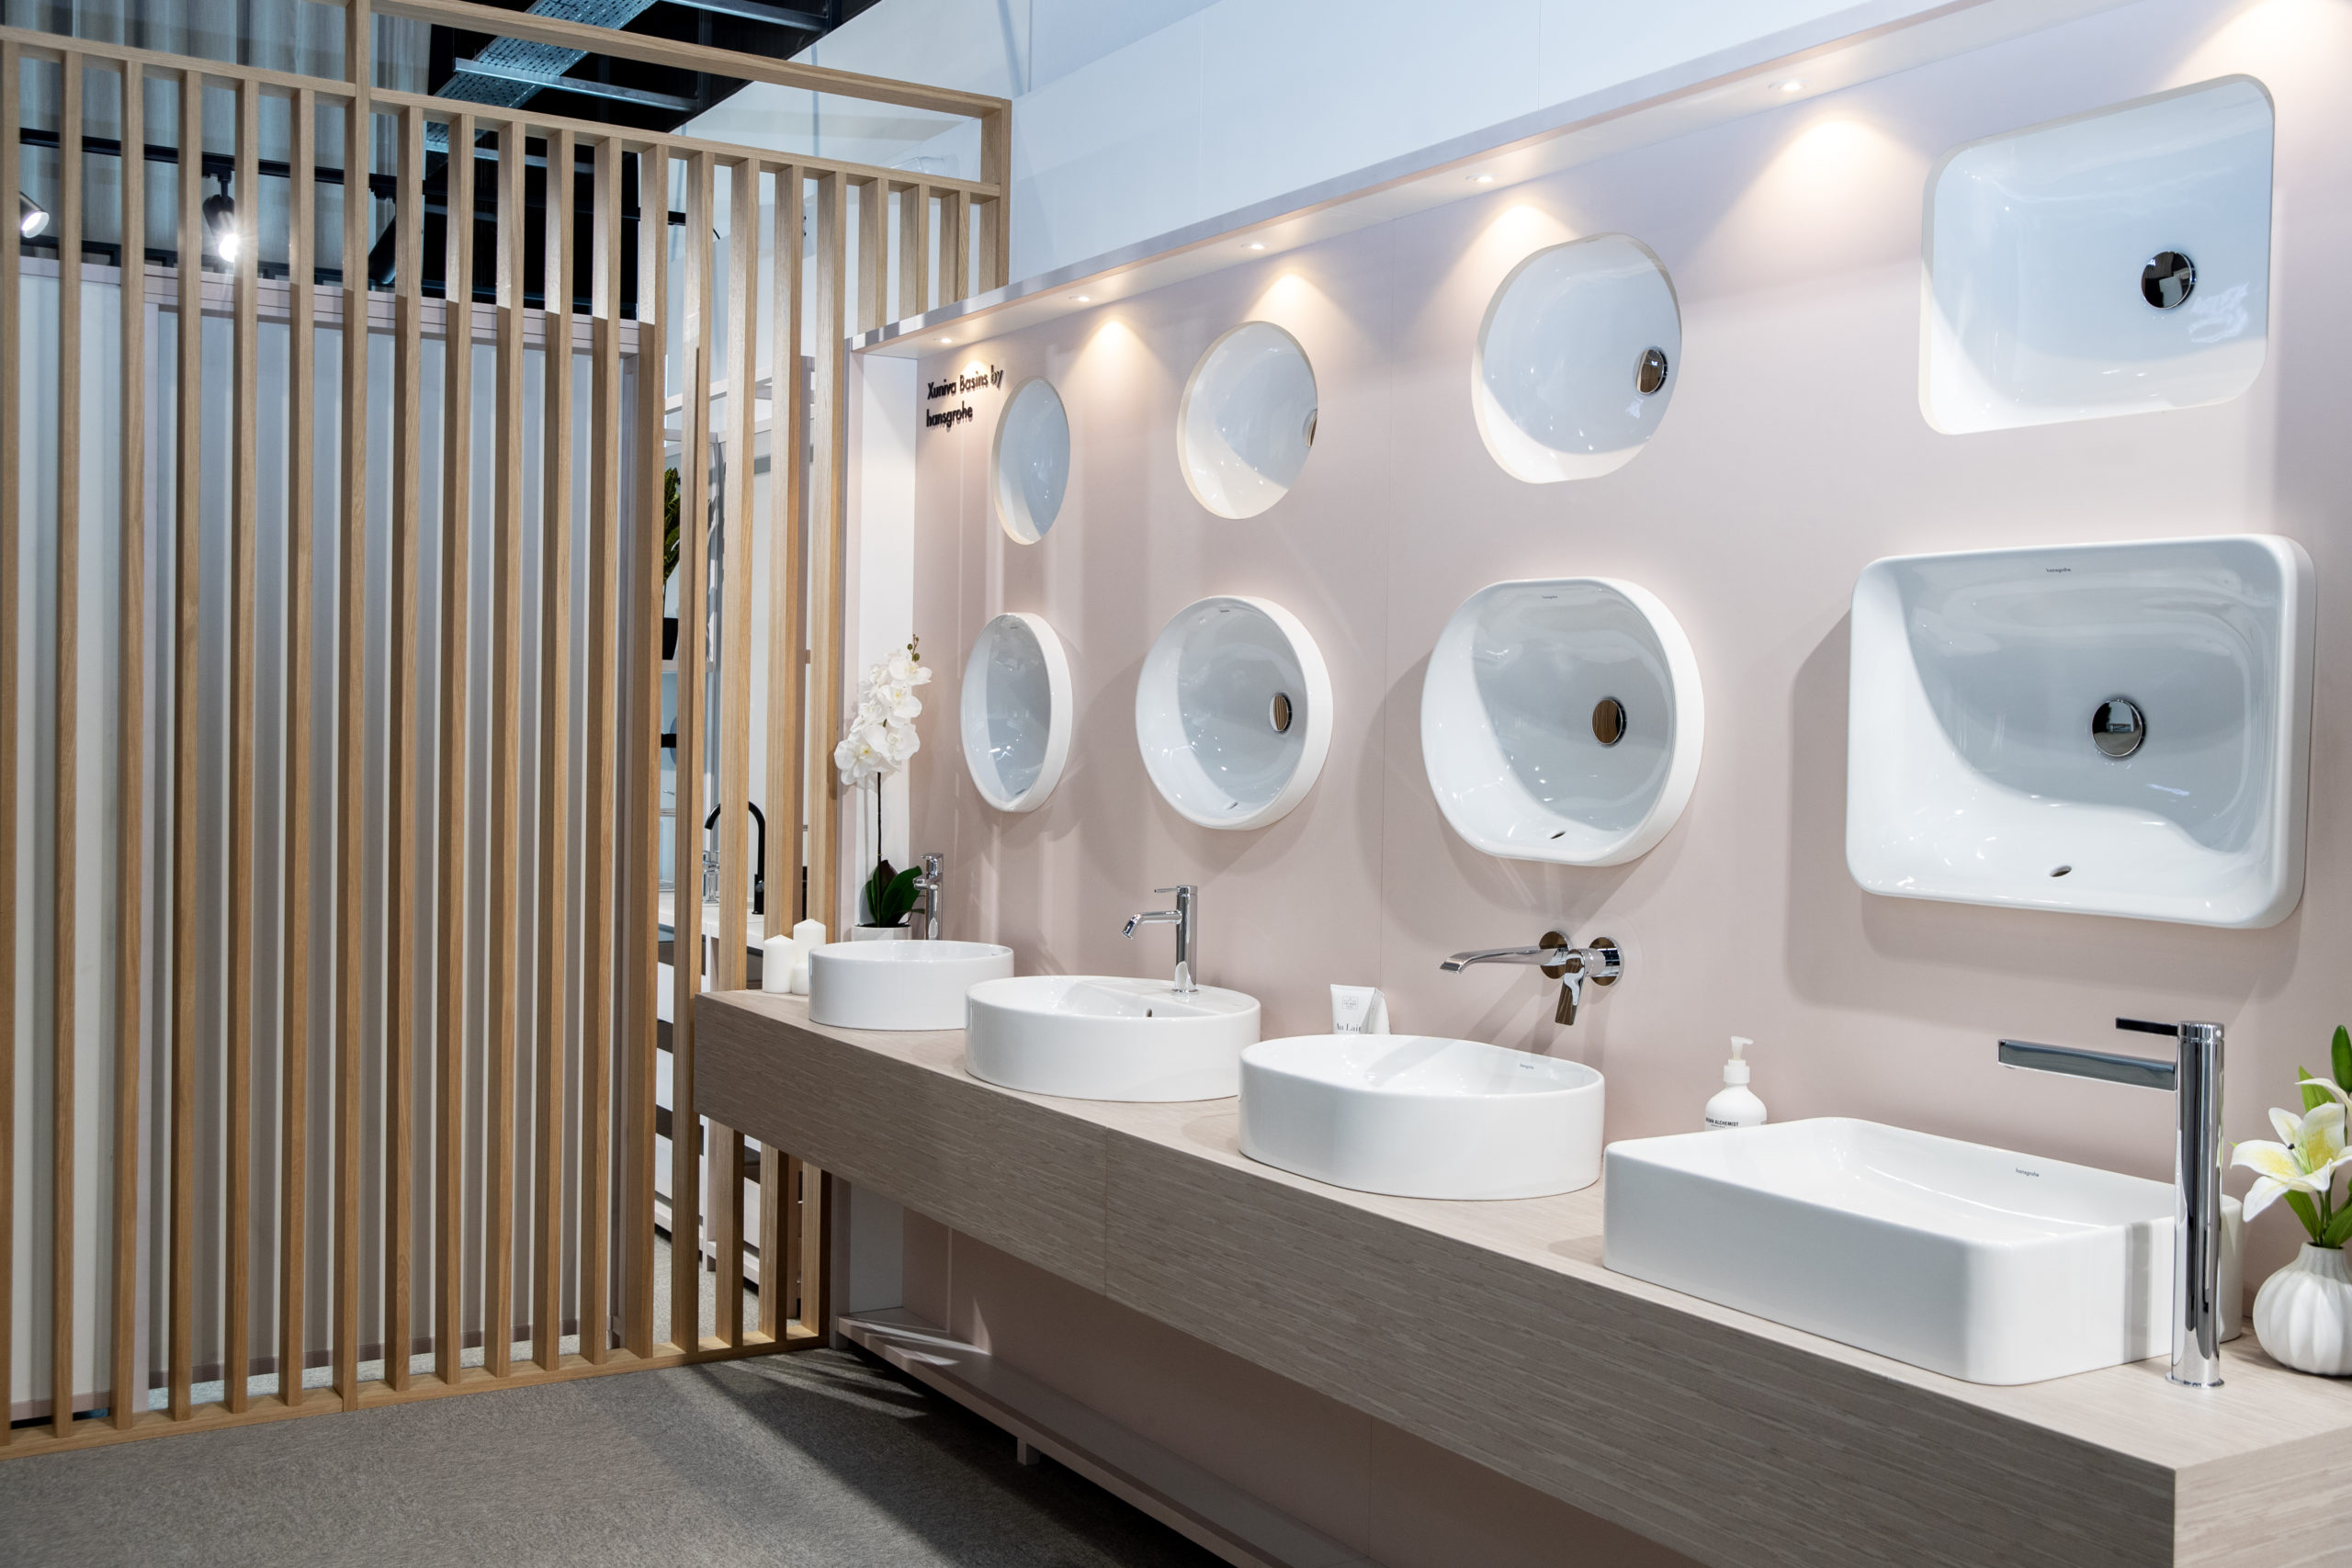 Boasting an array of enhanced facilities, Hansgrohe has formally unveiled its new Warwick-based UK headquarters to key stakeholders and customers.